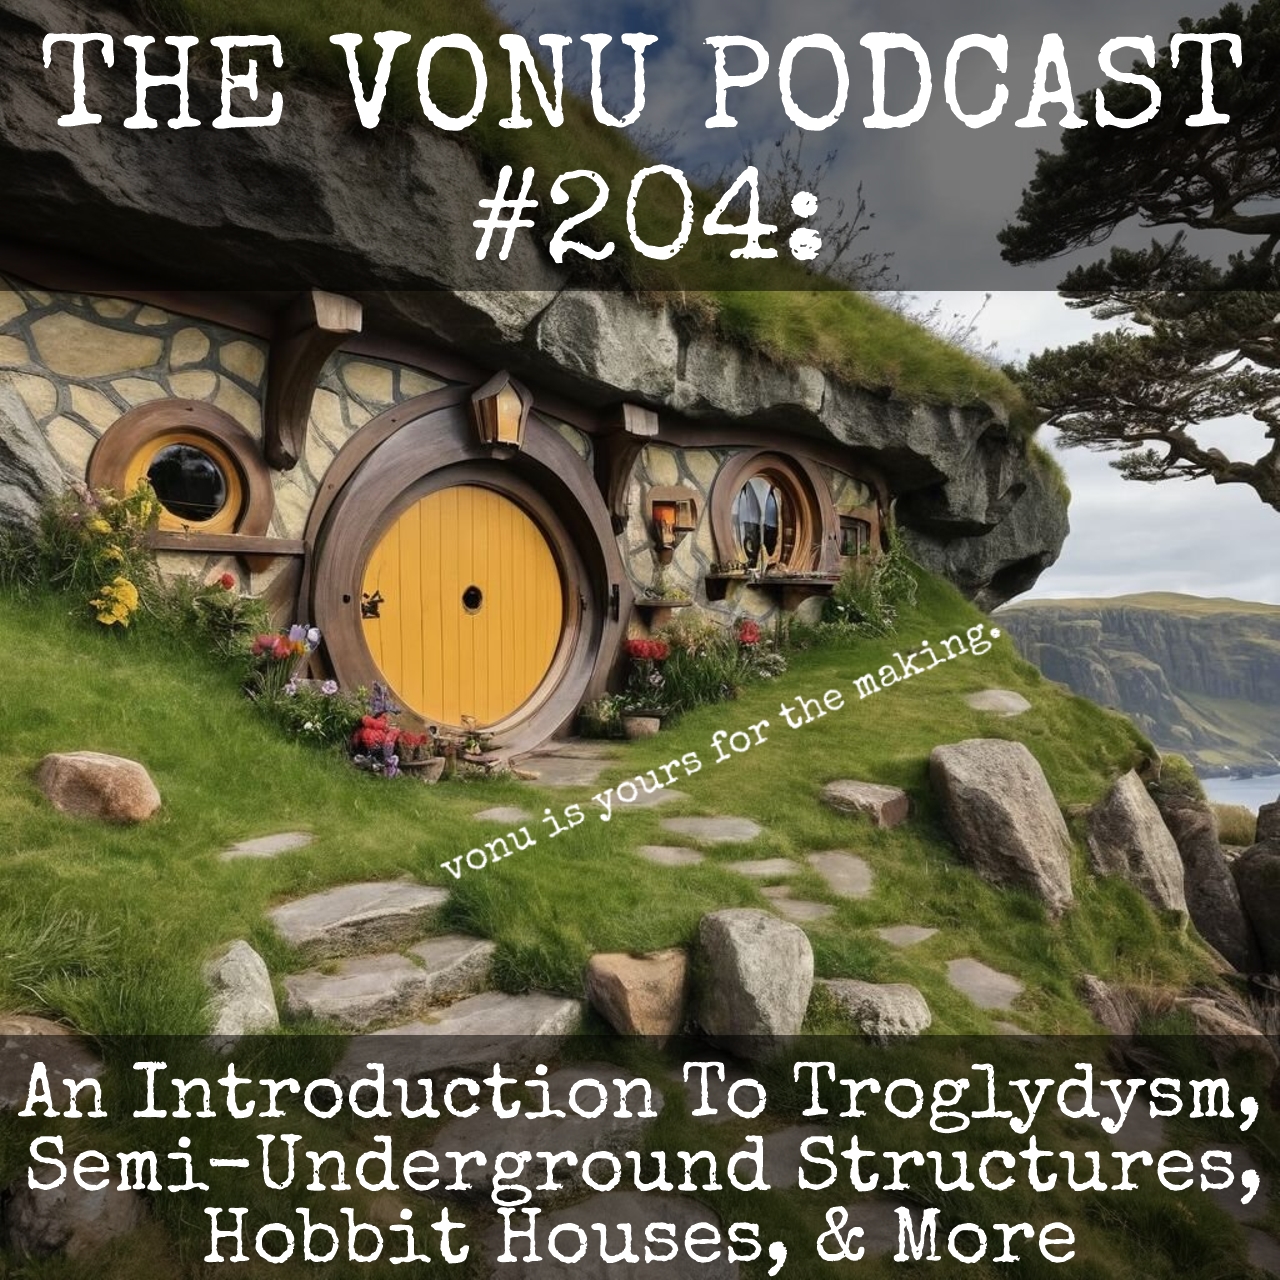 TVP #204: An Introduction To Troglydysm, Semi-Underground Structures, Hobbit Houses, & More